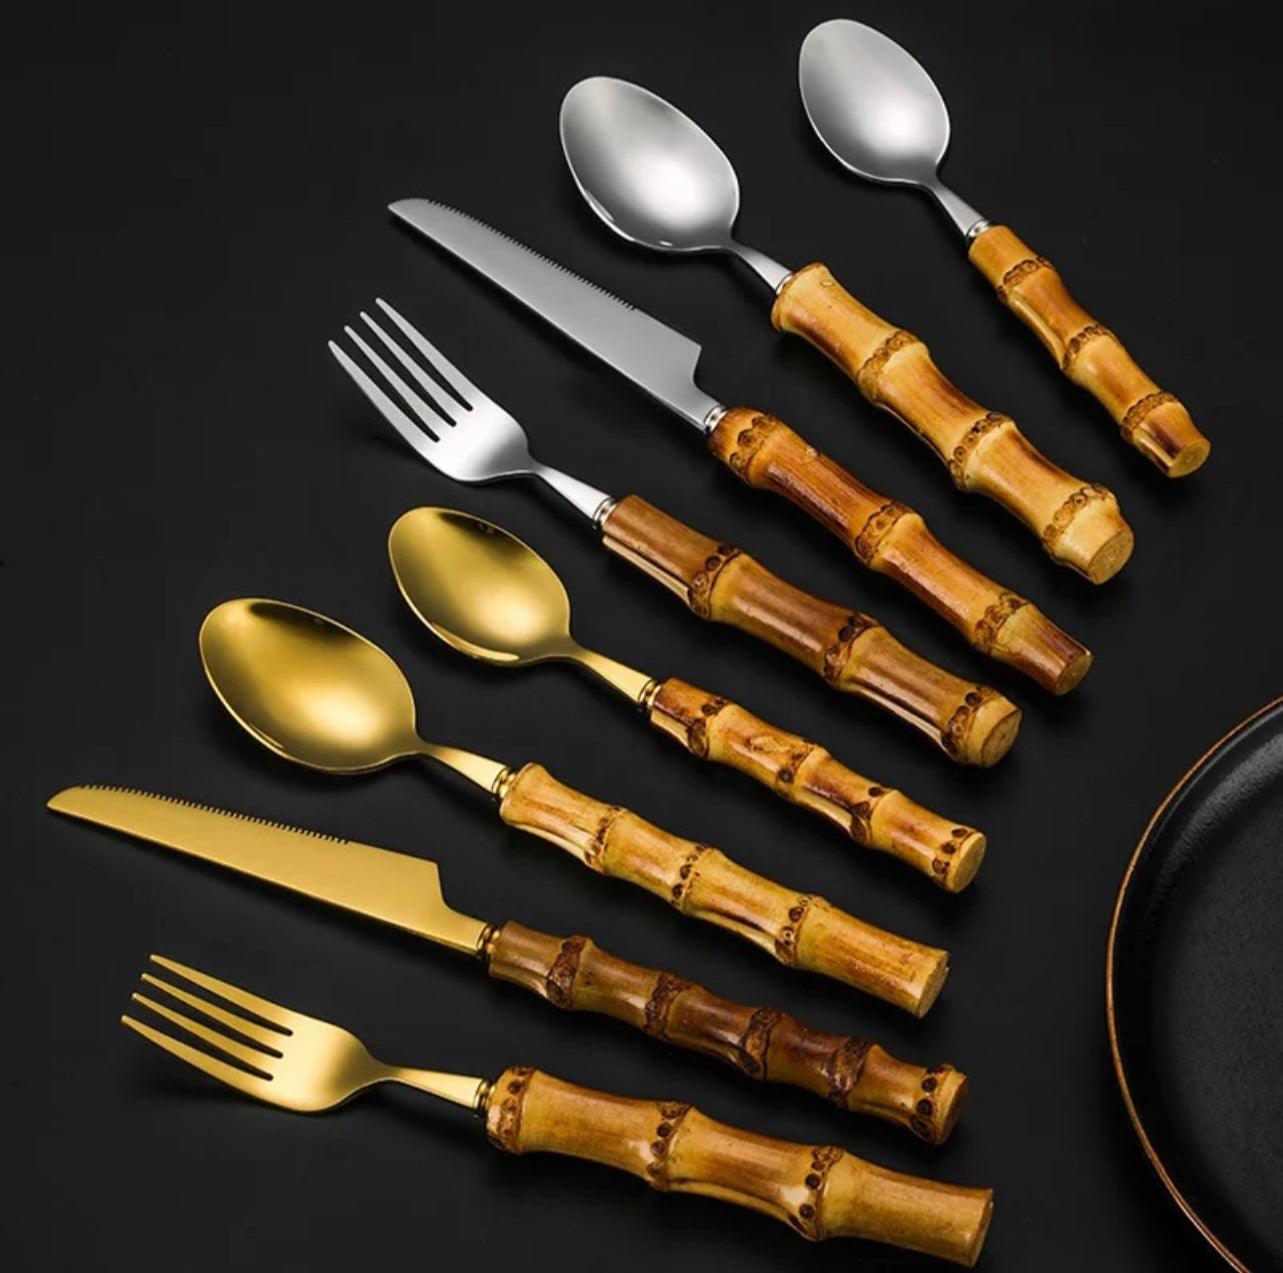 Bamboo Handle Cutlery - Expat Life Style